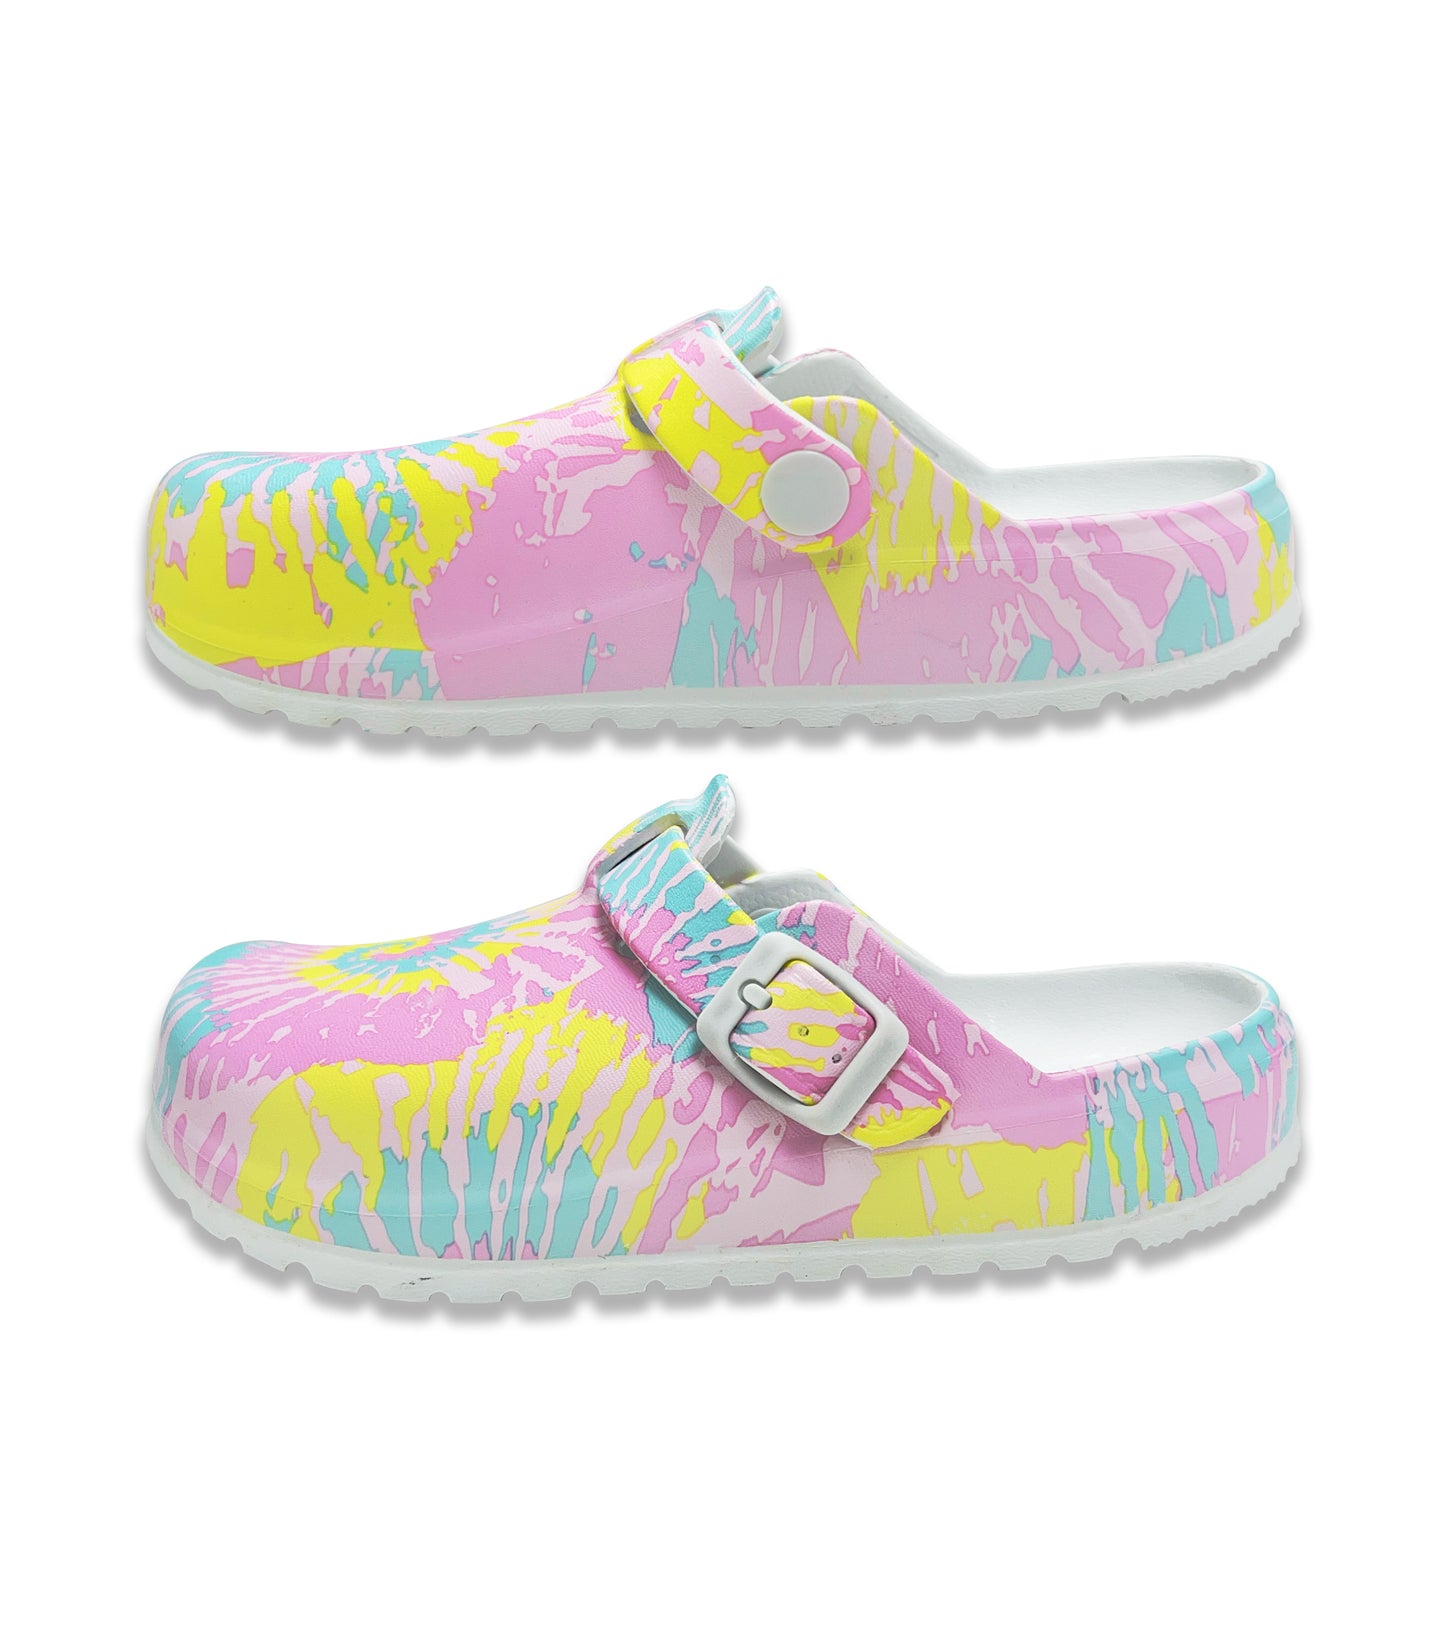 Colorful Spiral Printed Clogs